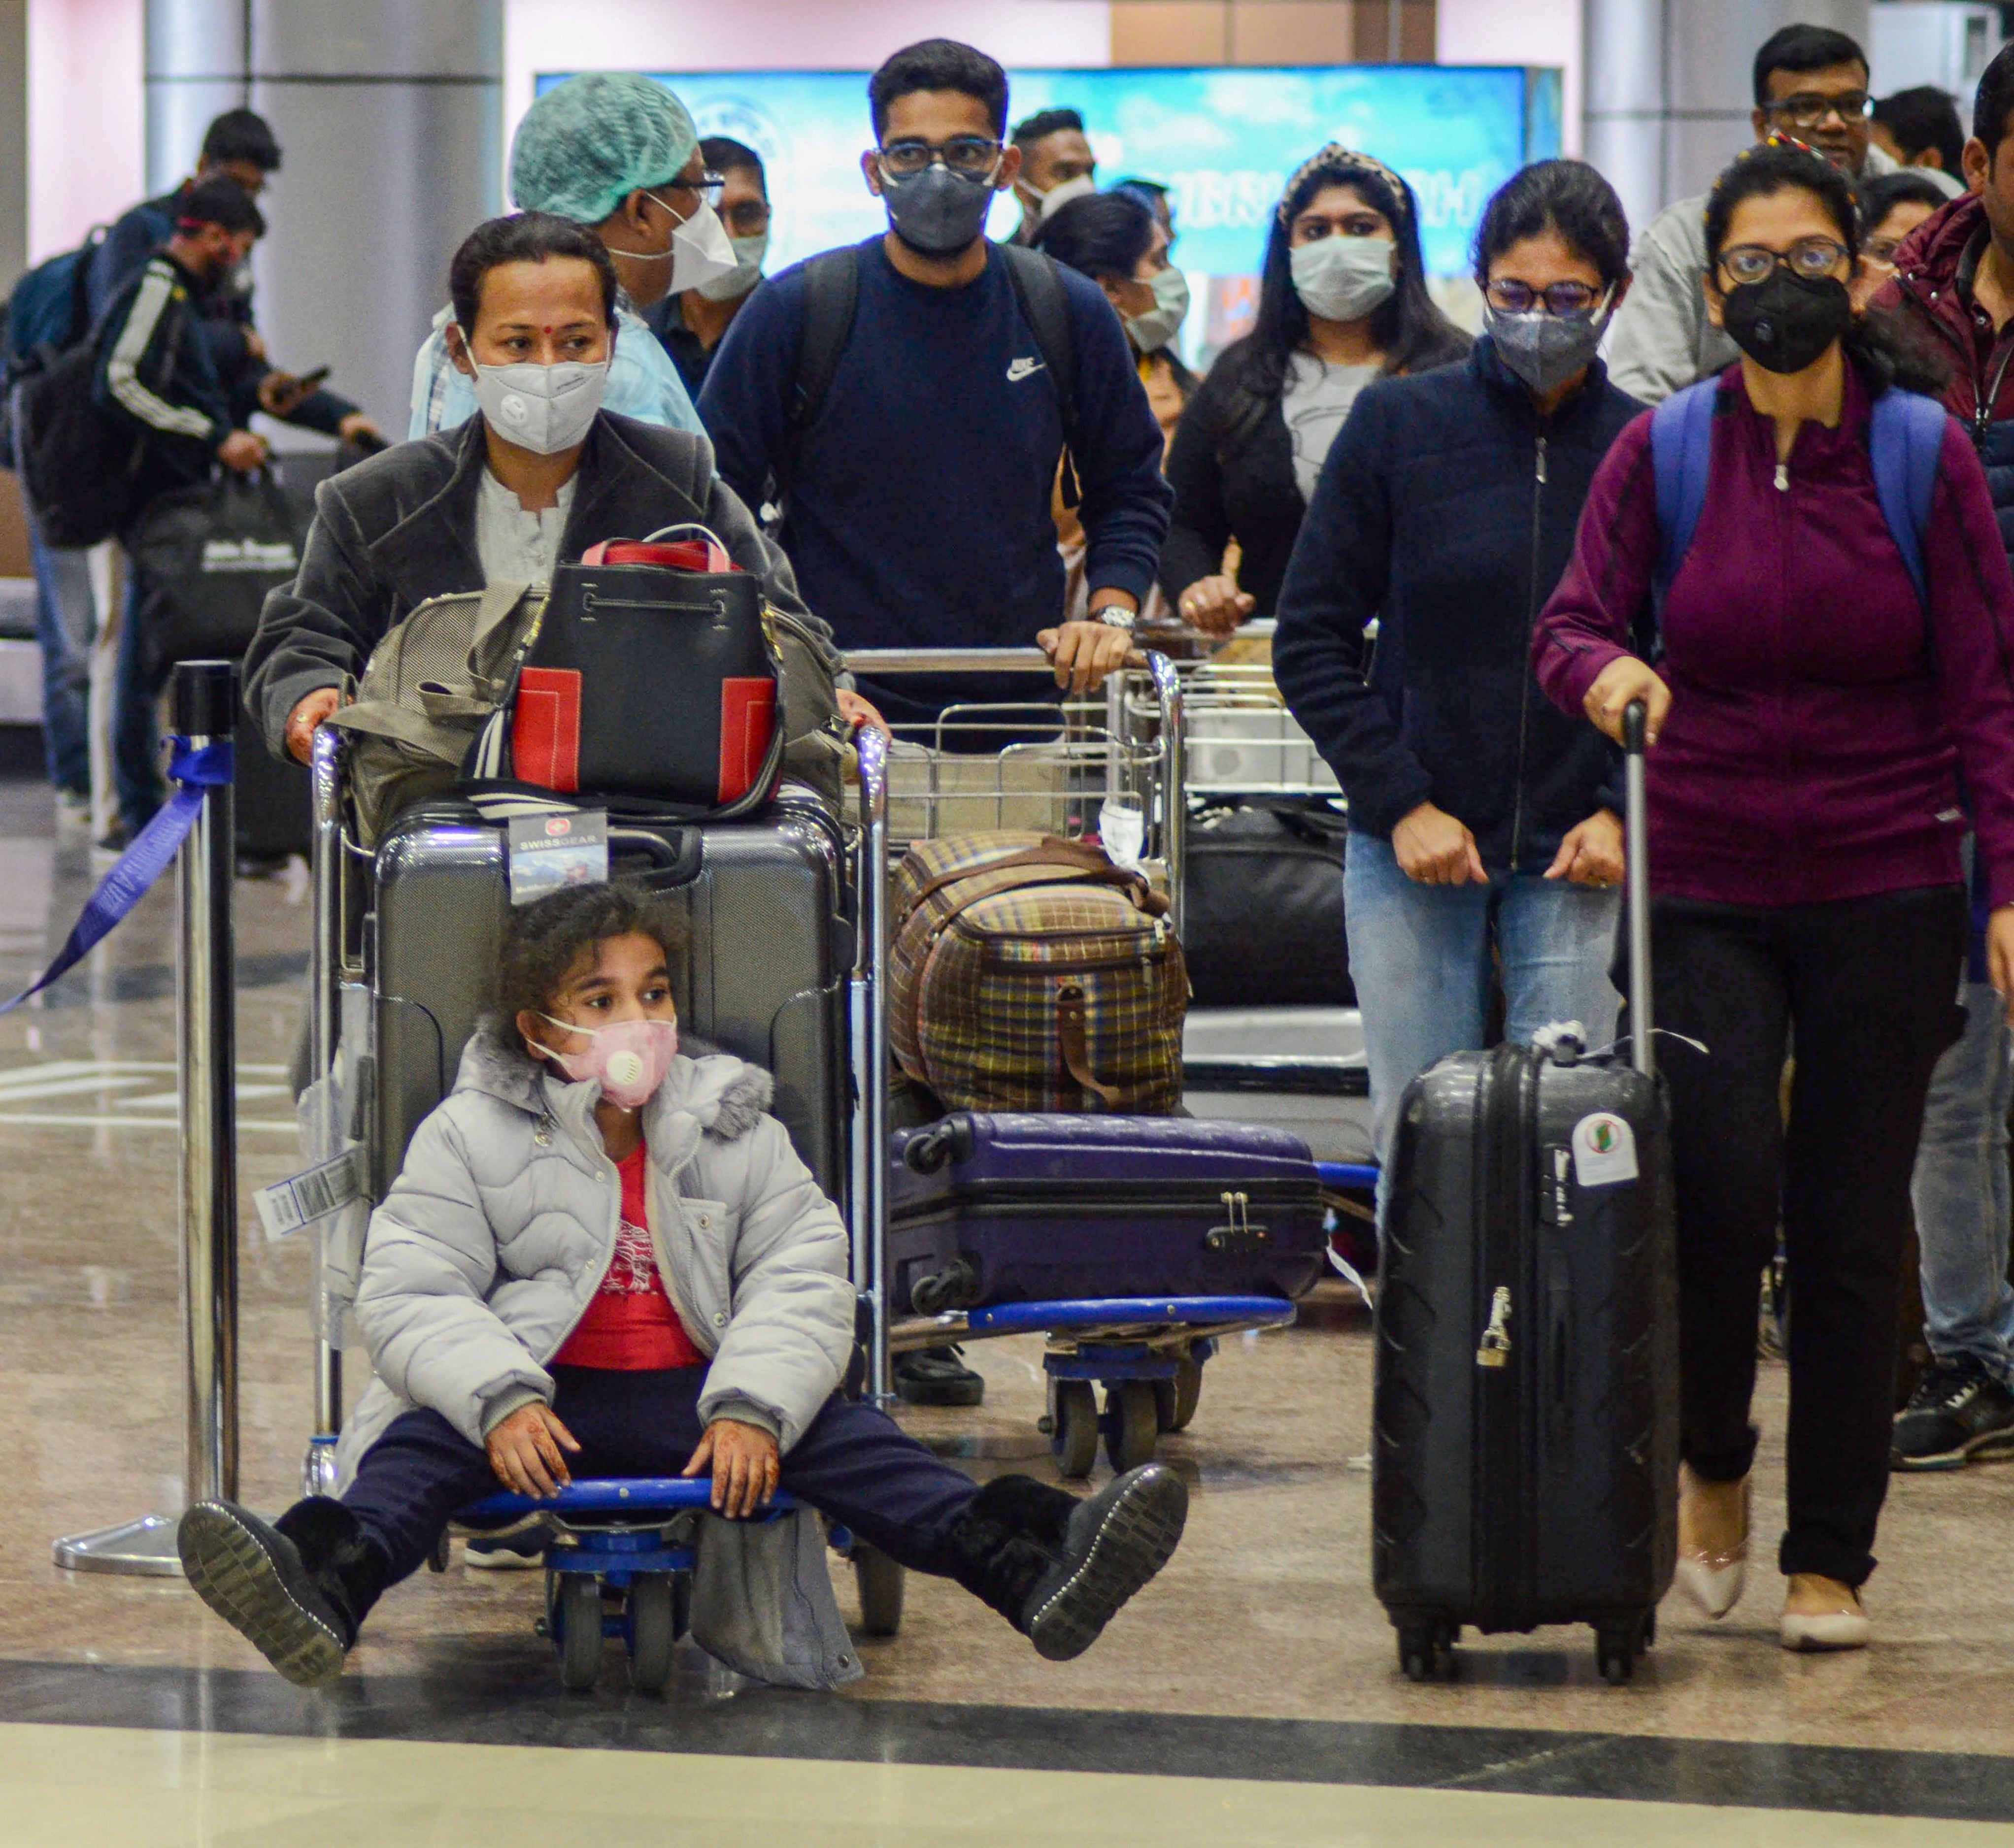 People wear masks as they arrive at an international airport in India. (Credit: PTI)